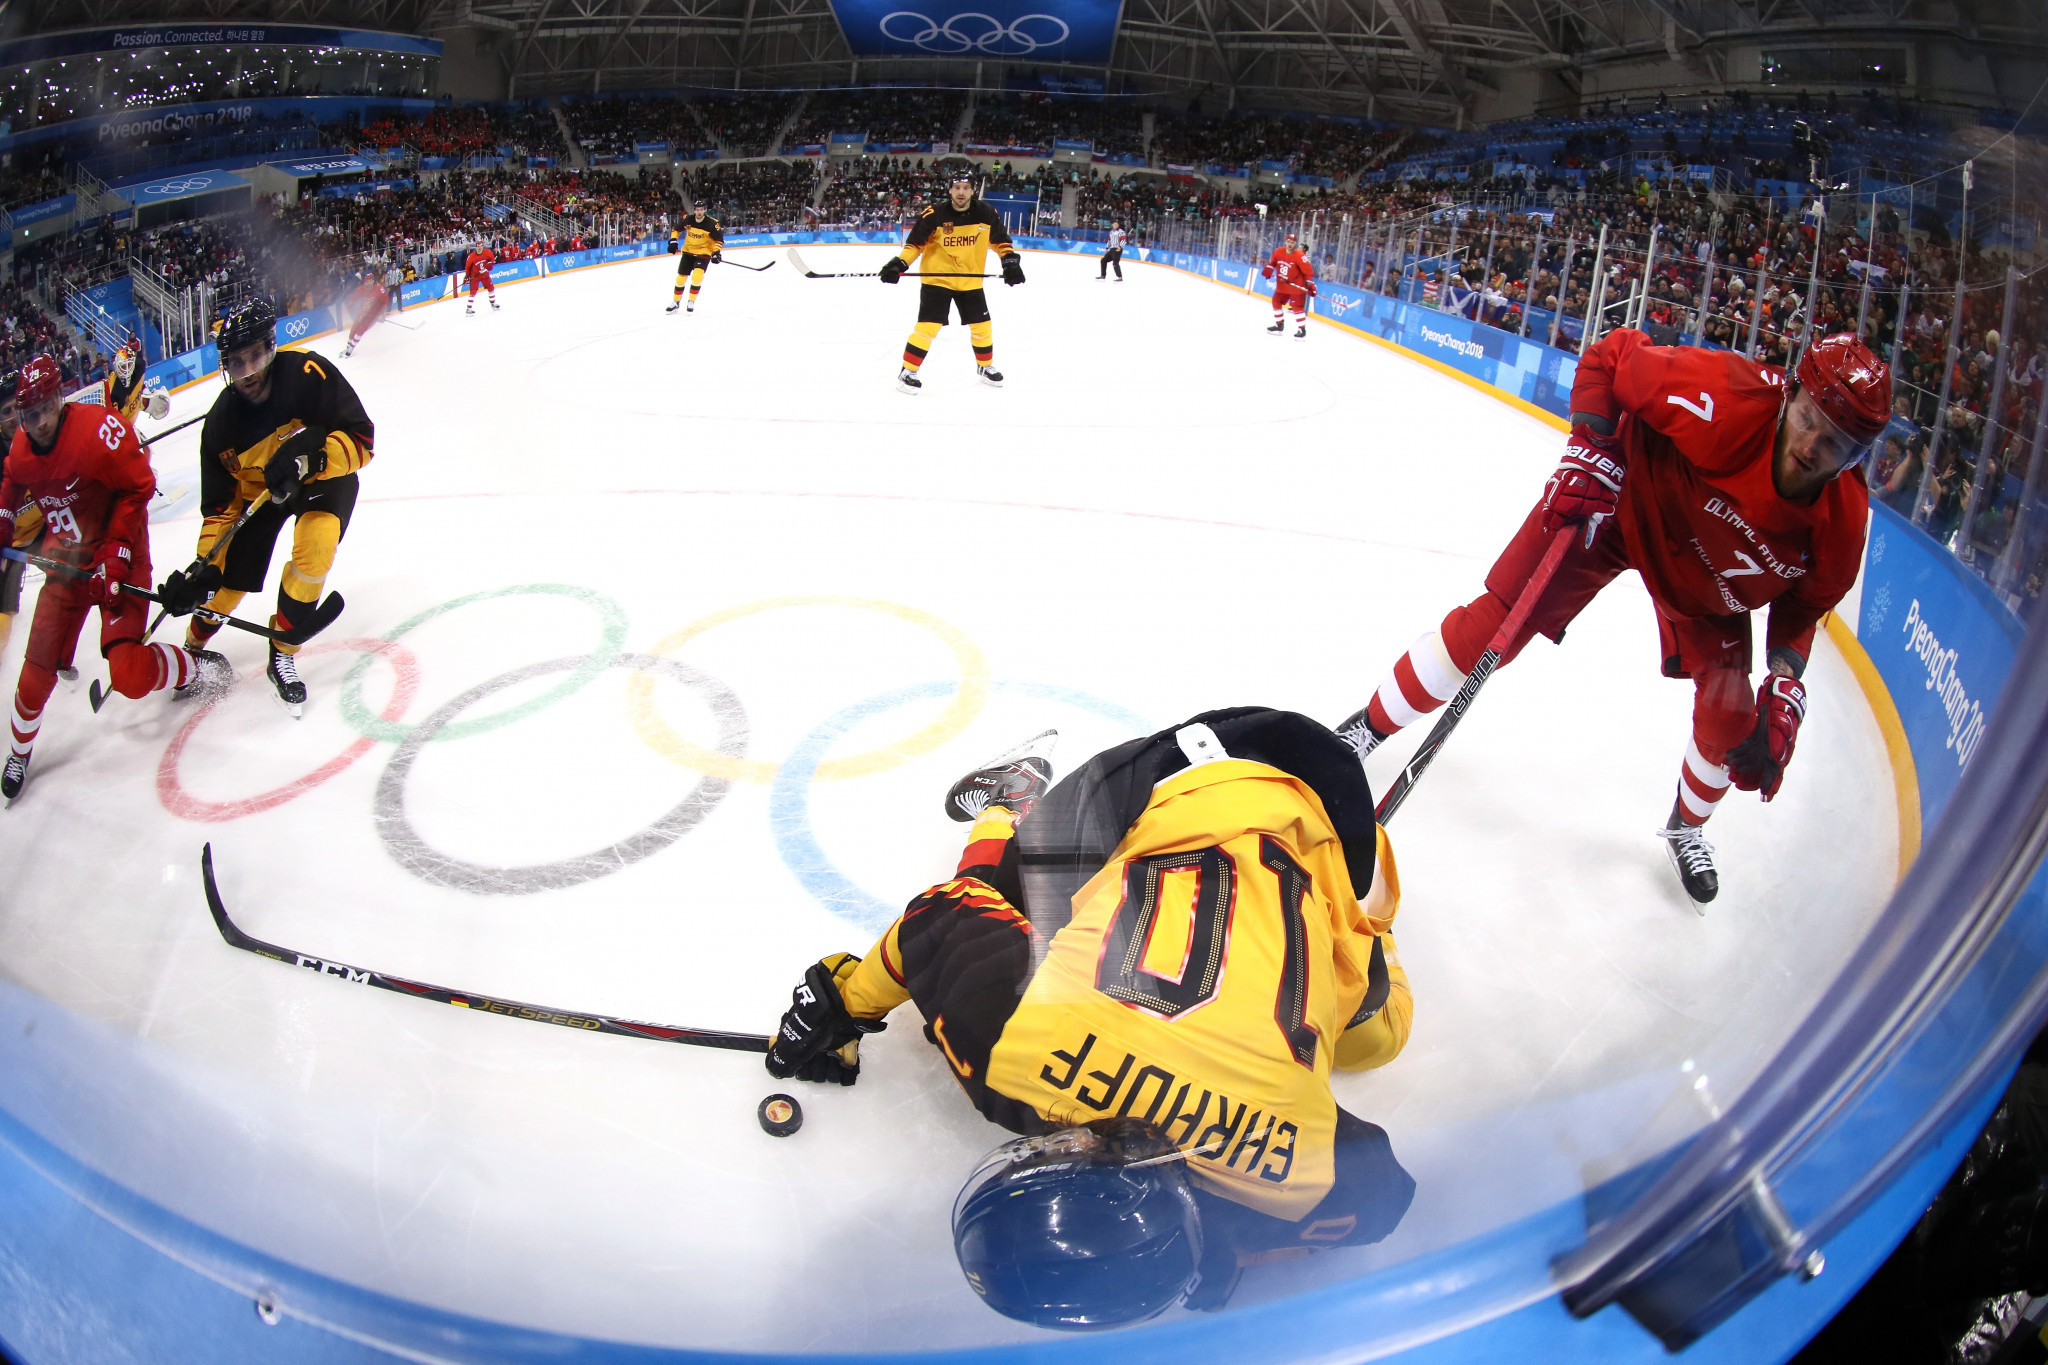 Deal for NHL players to play at Beijing 2022 could hinge on them supporting World Cup 